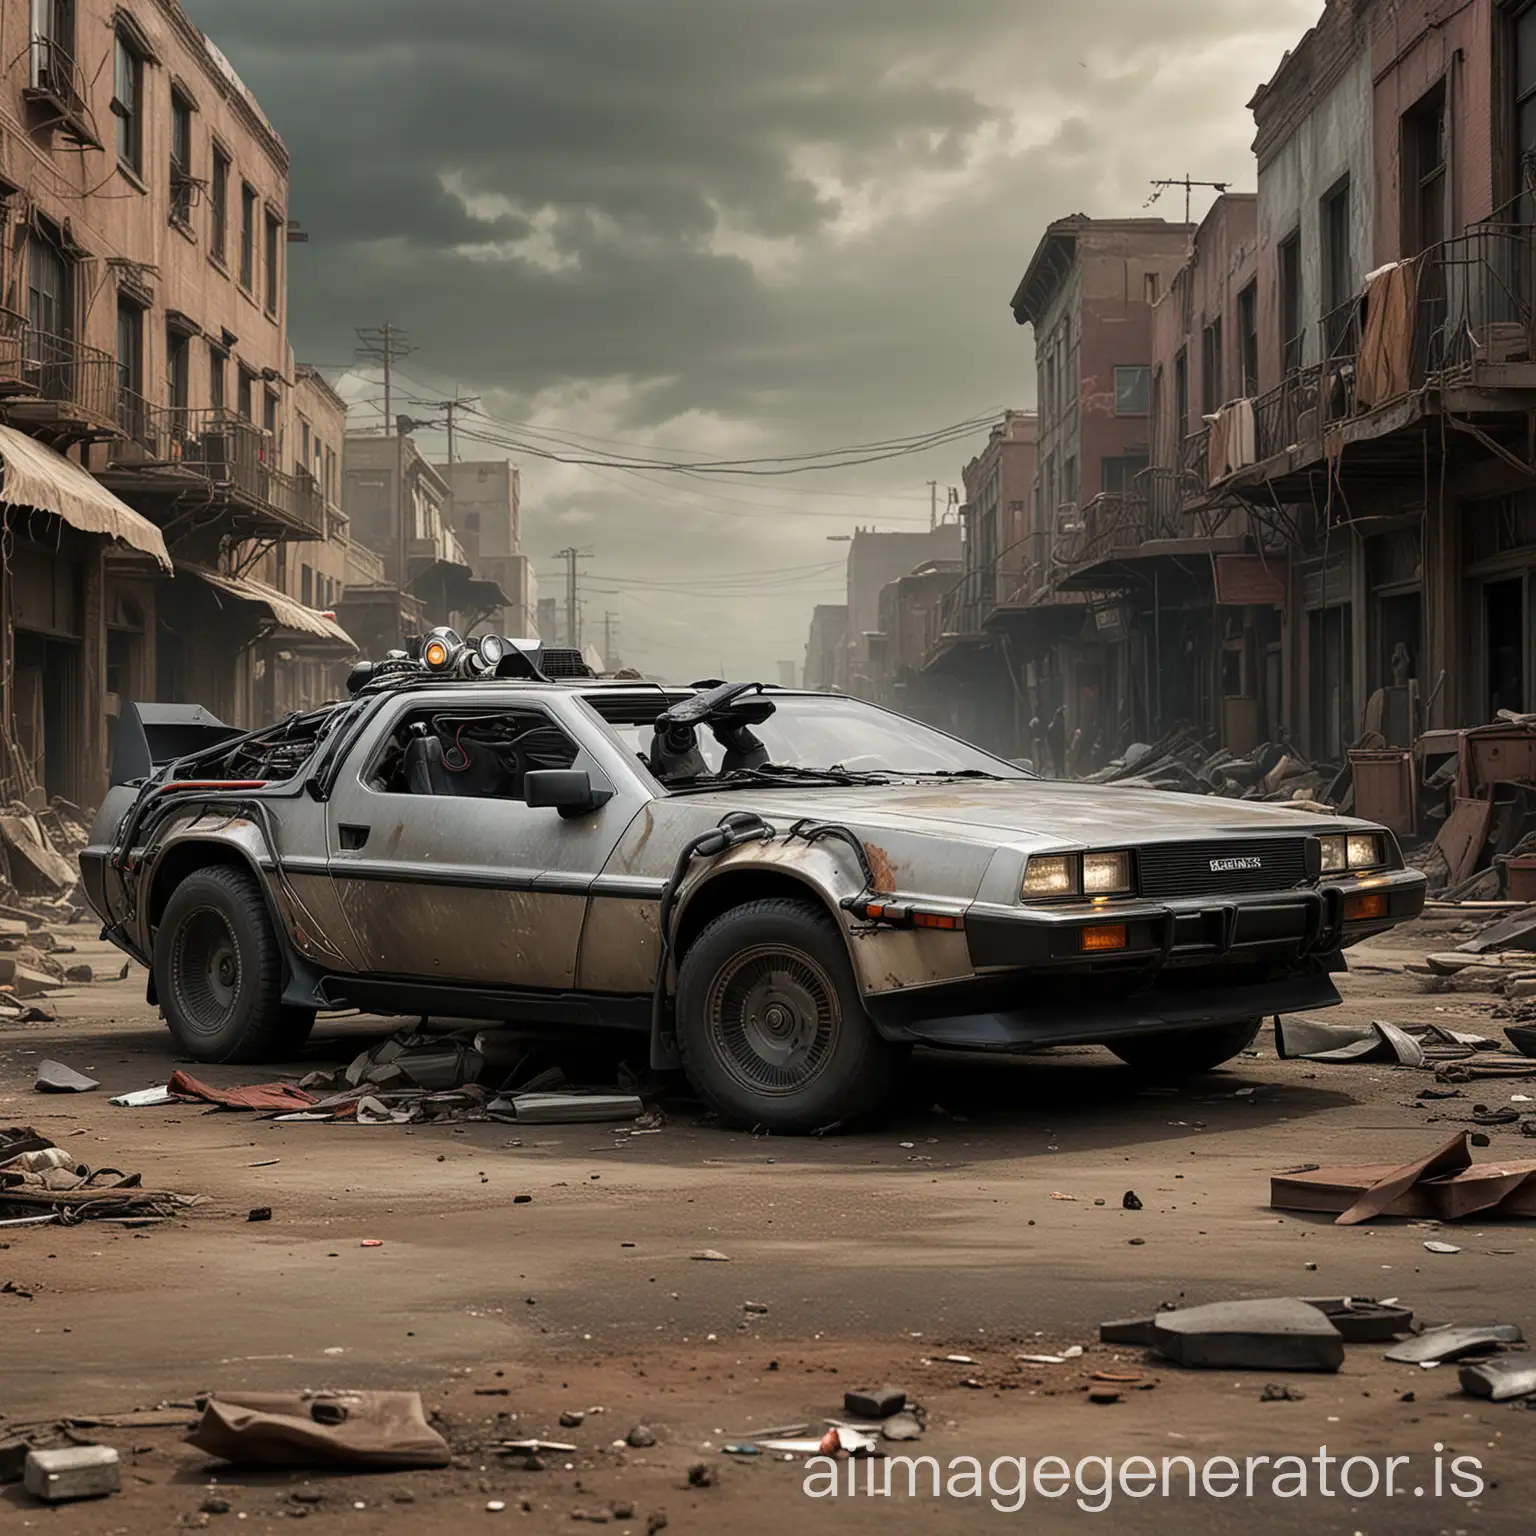 delorean in a post apocalyptic town